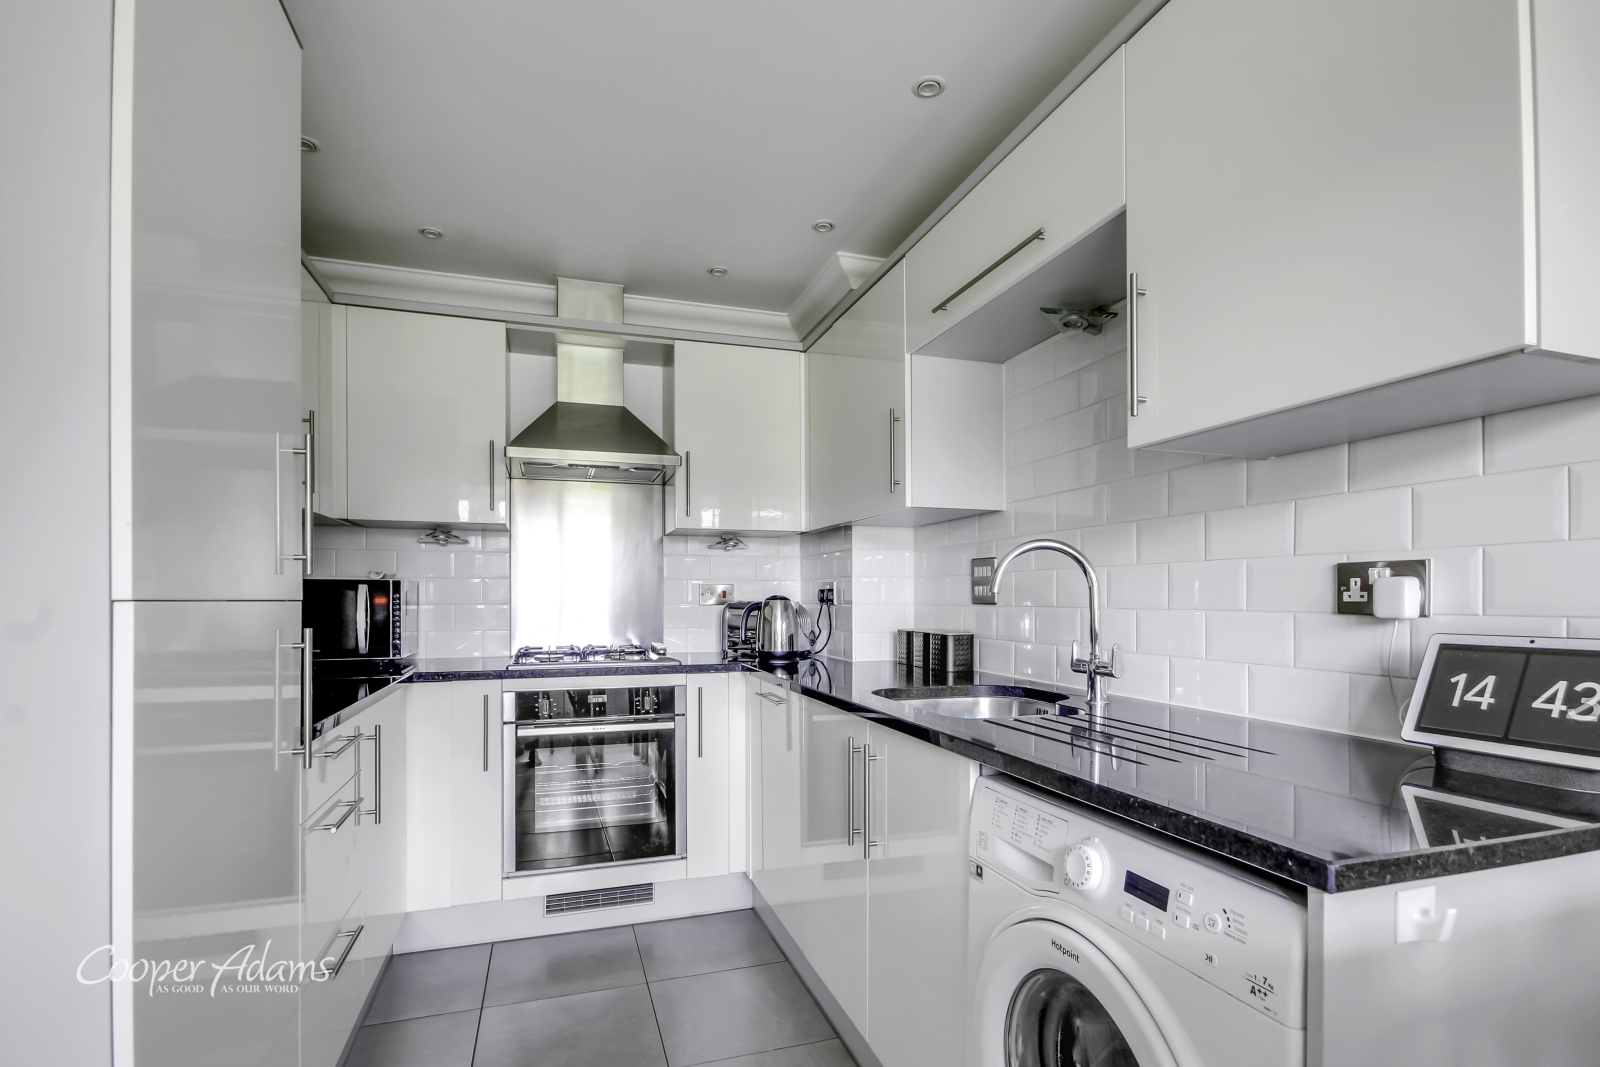 4 bed house for sale  - Property Image 3